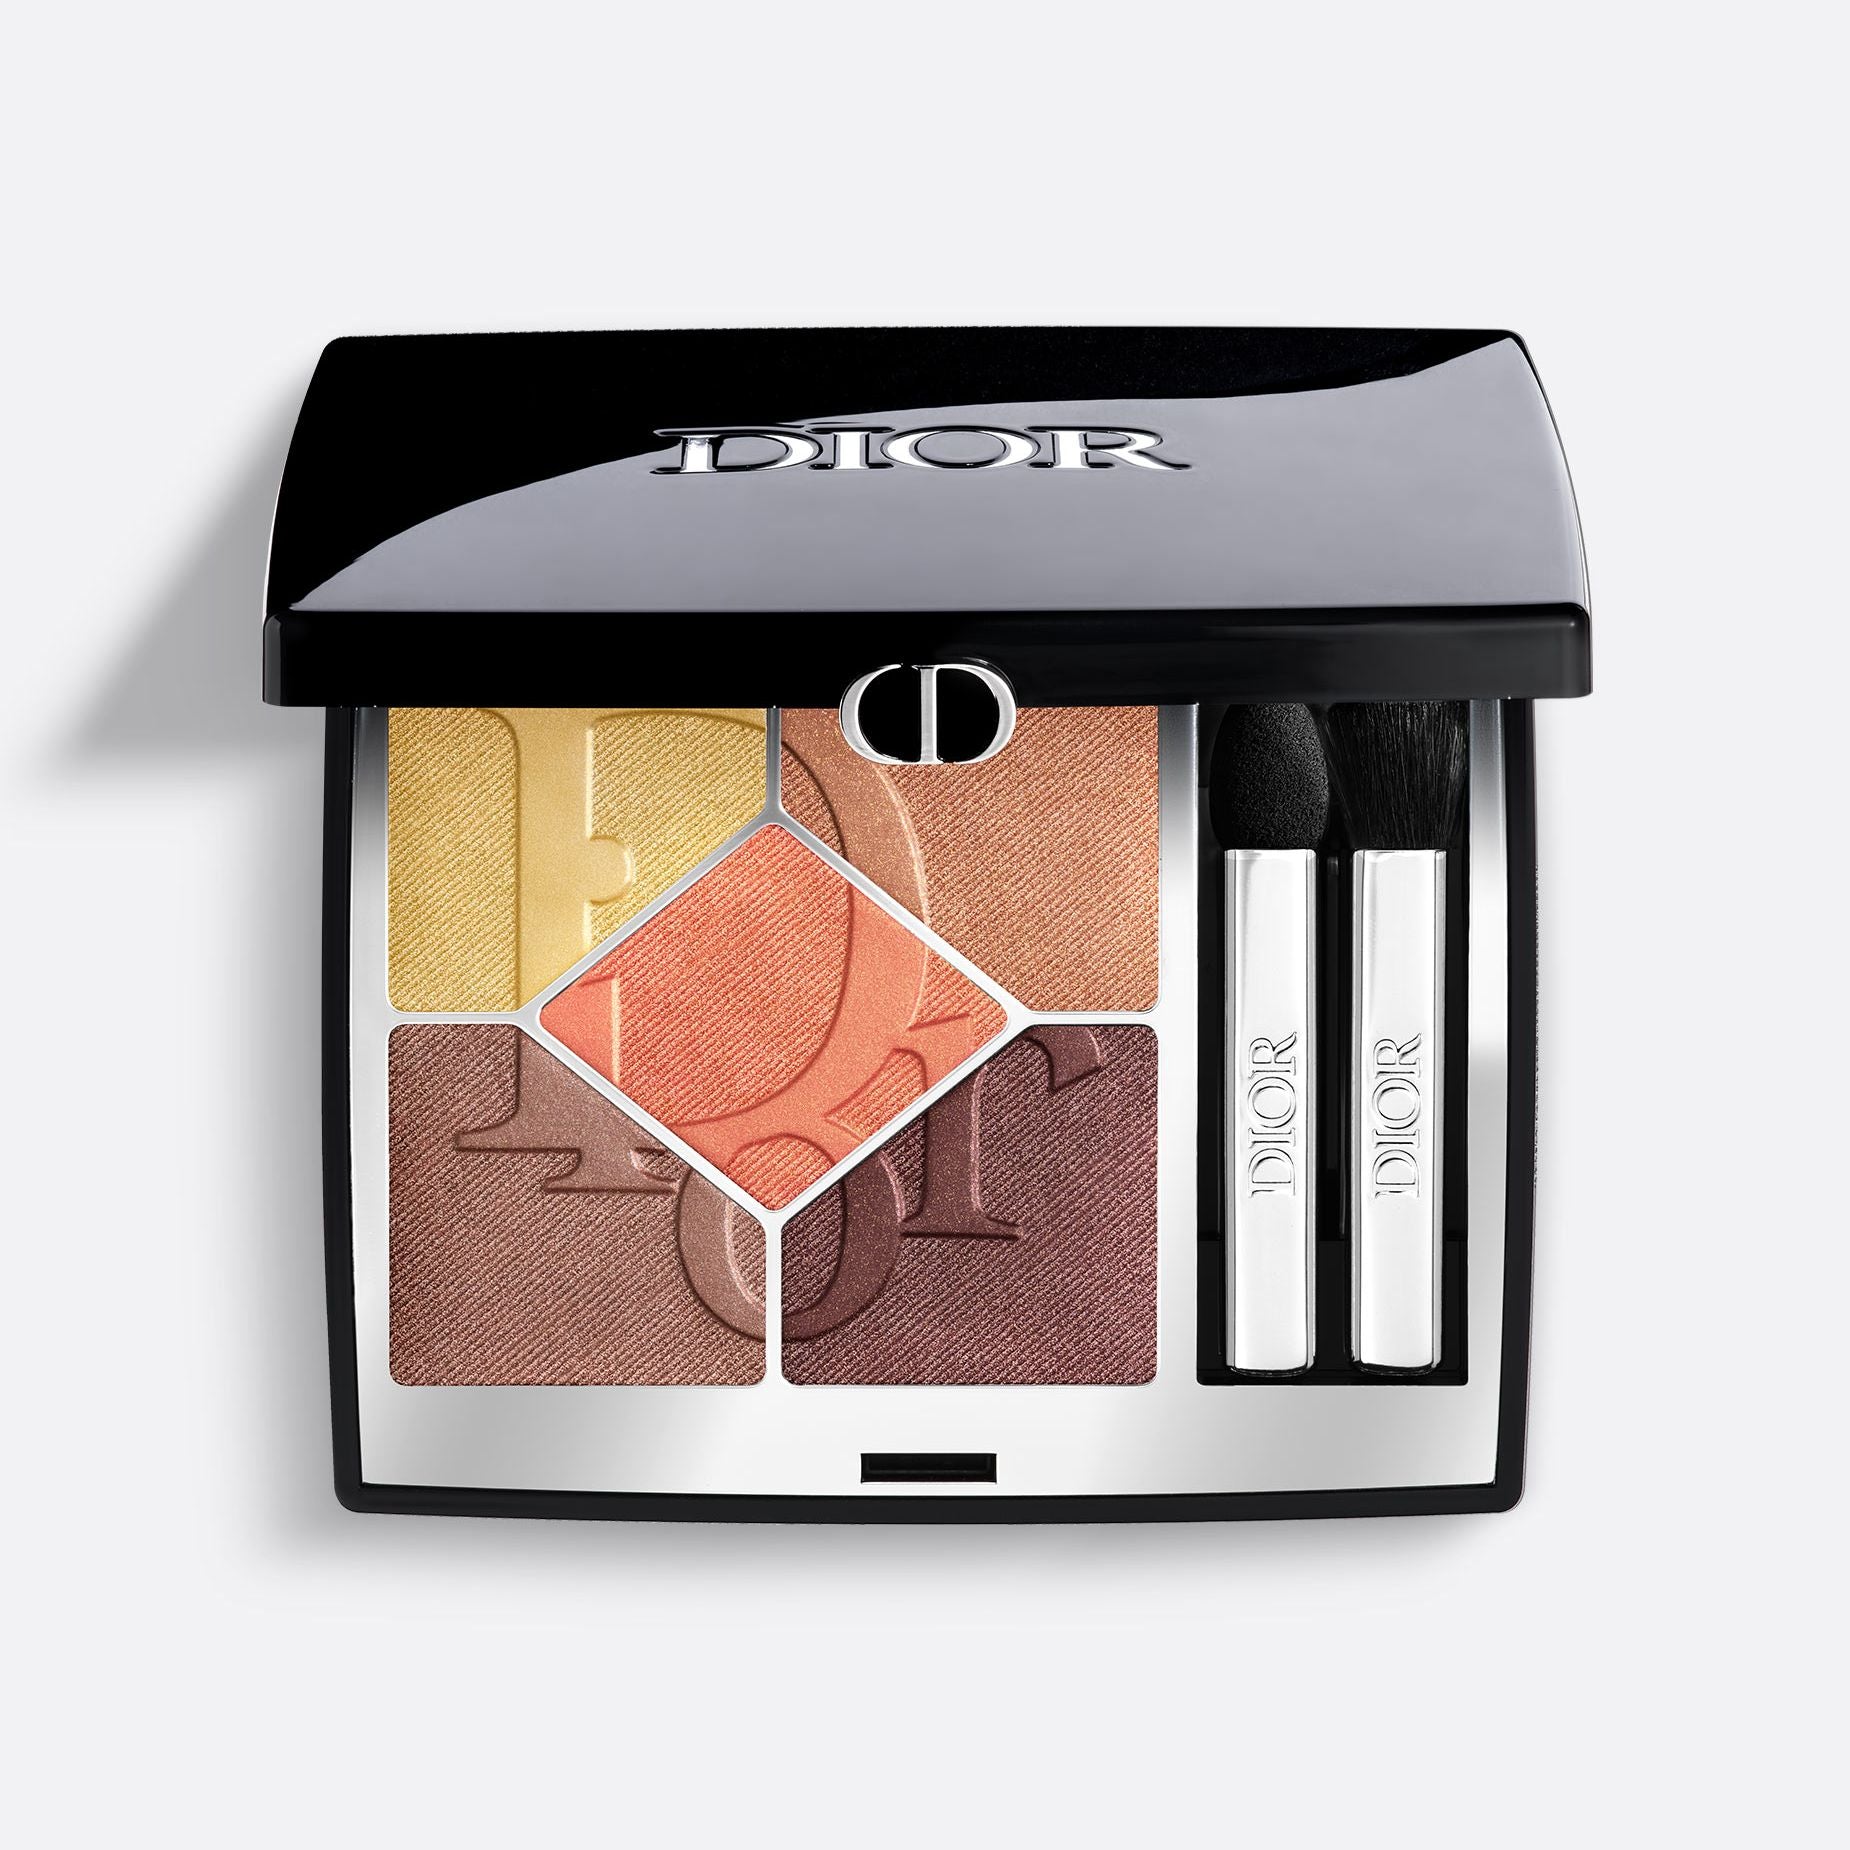 DIORSHOW 5 COULEURS ~ High Color Eyeshadow Wardrobe - Limited Edition